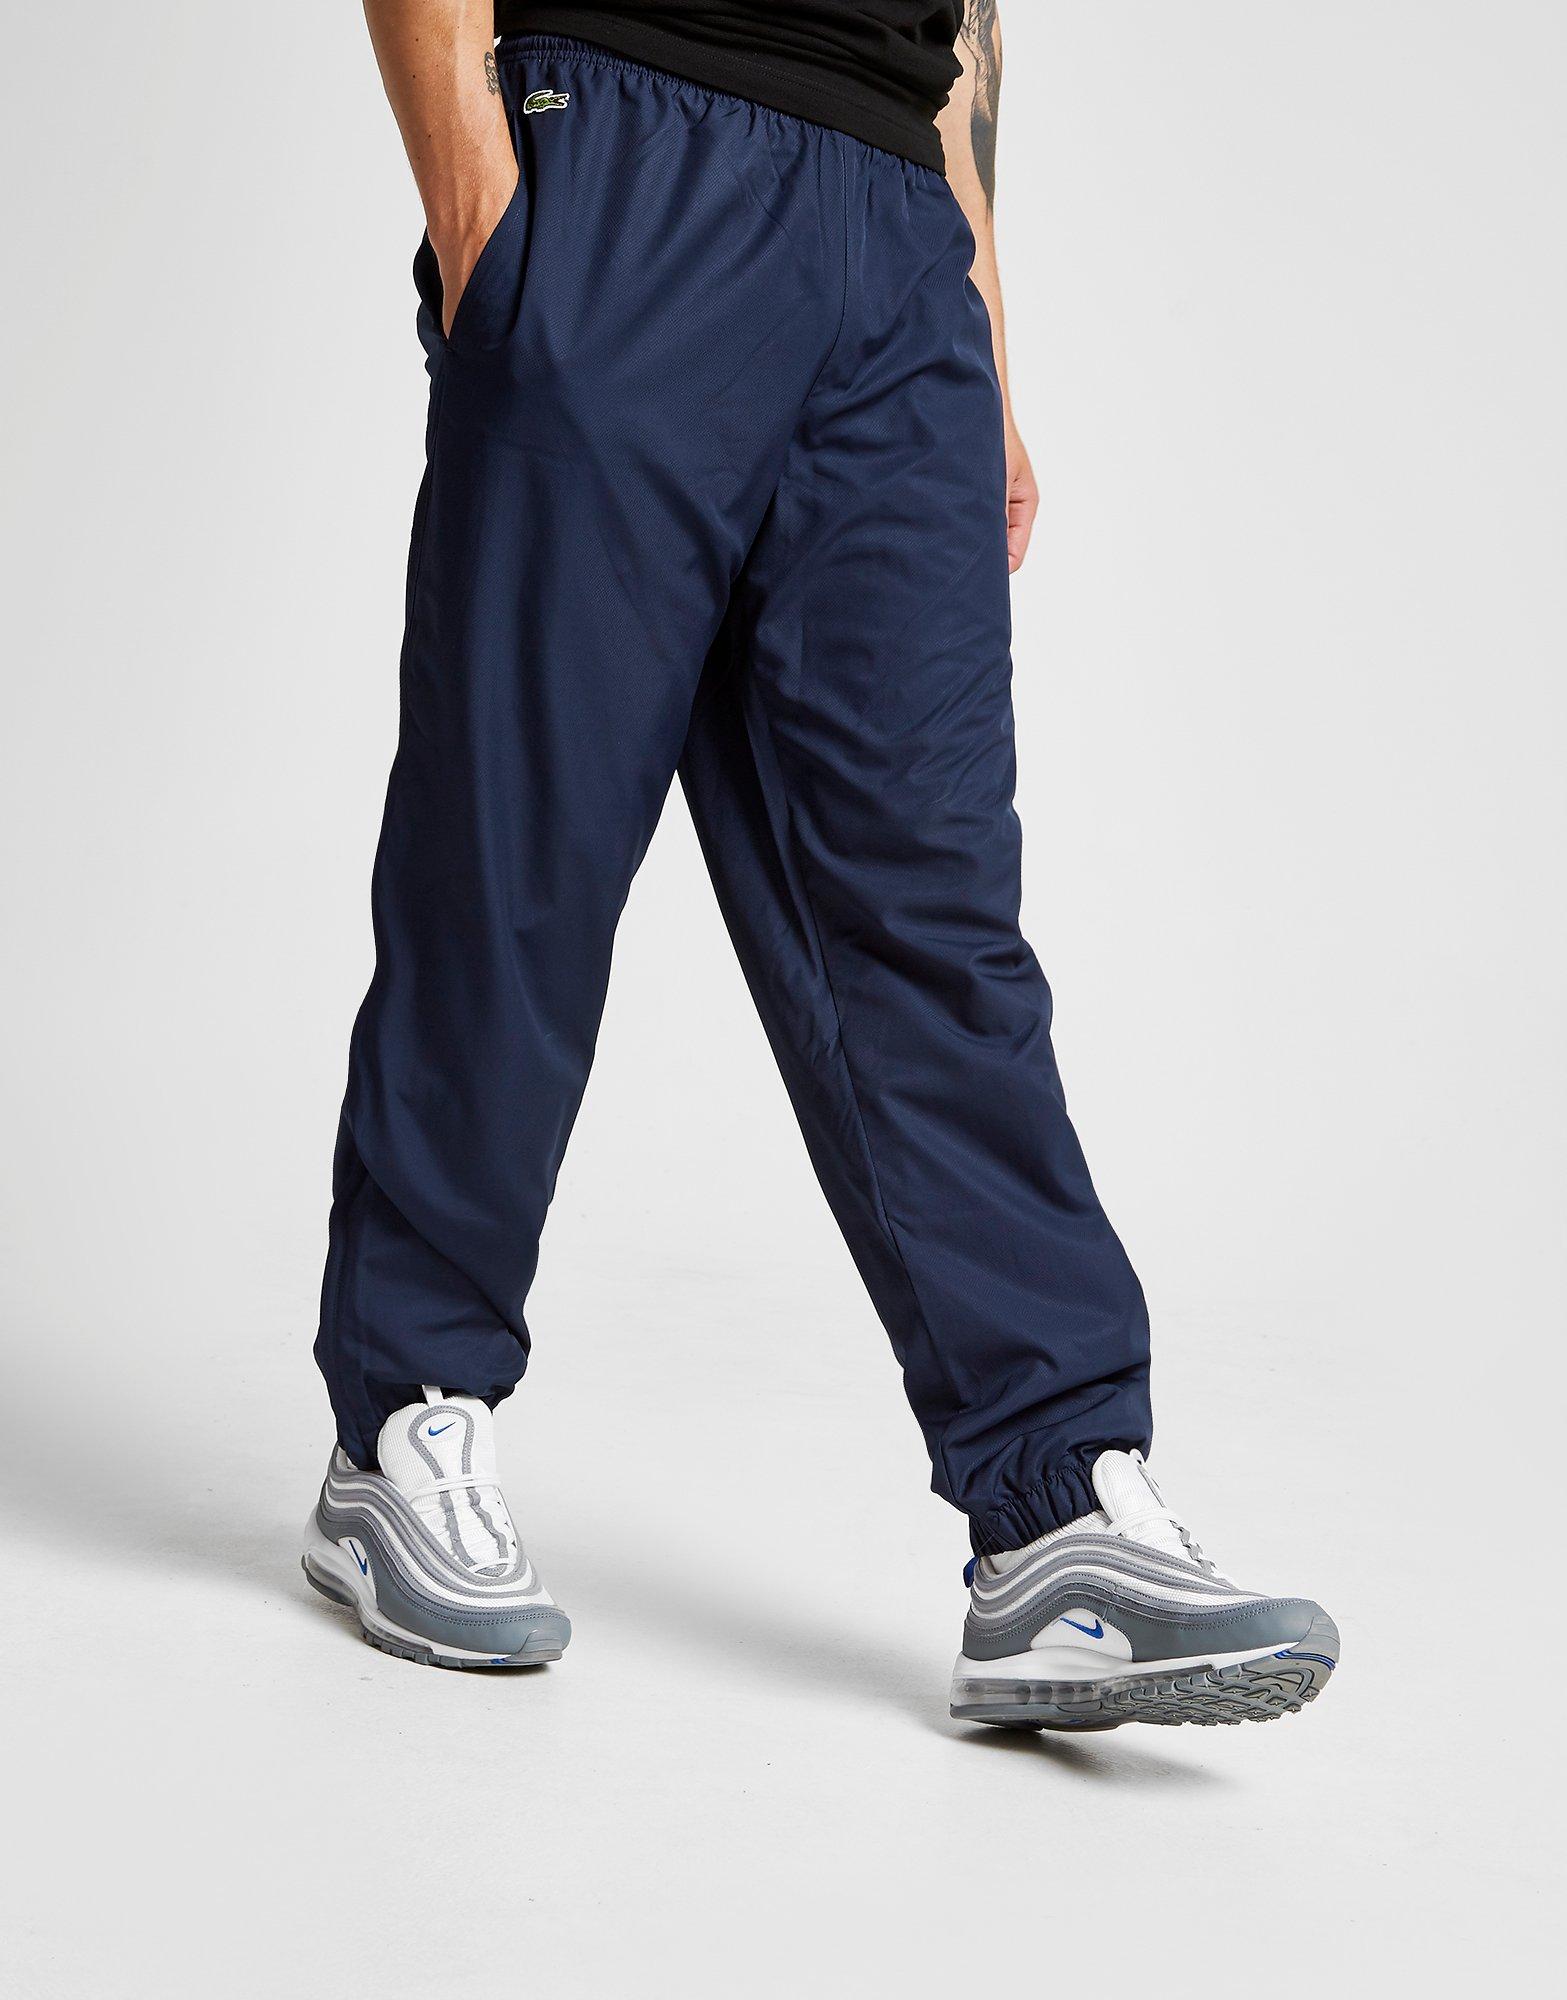 lacoste track pants